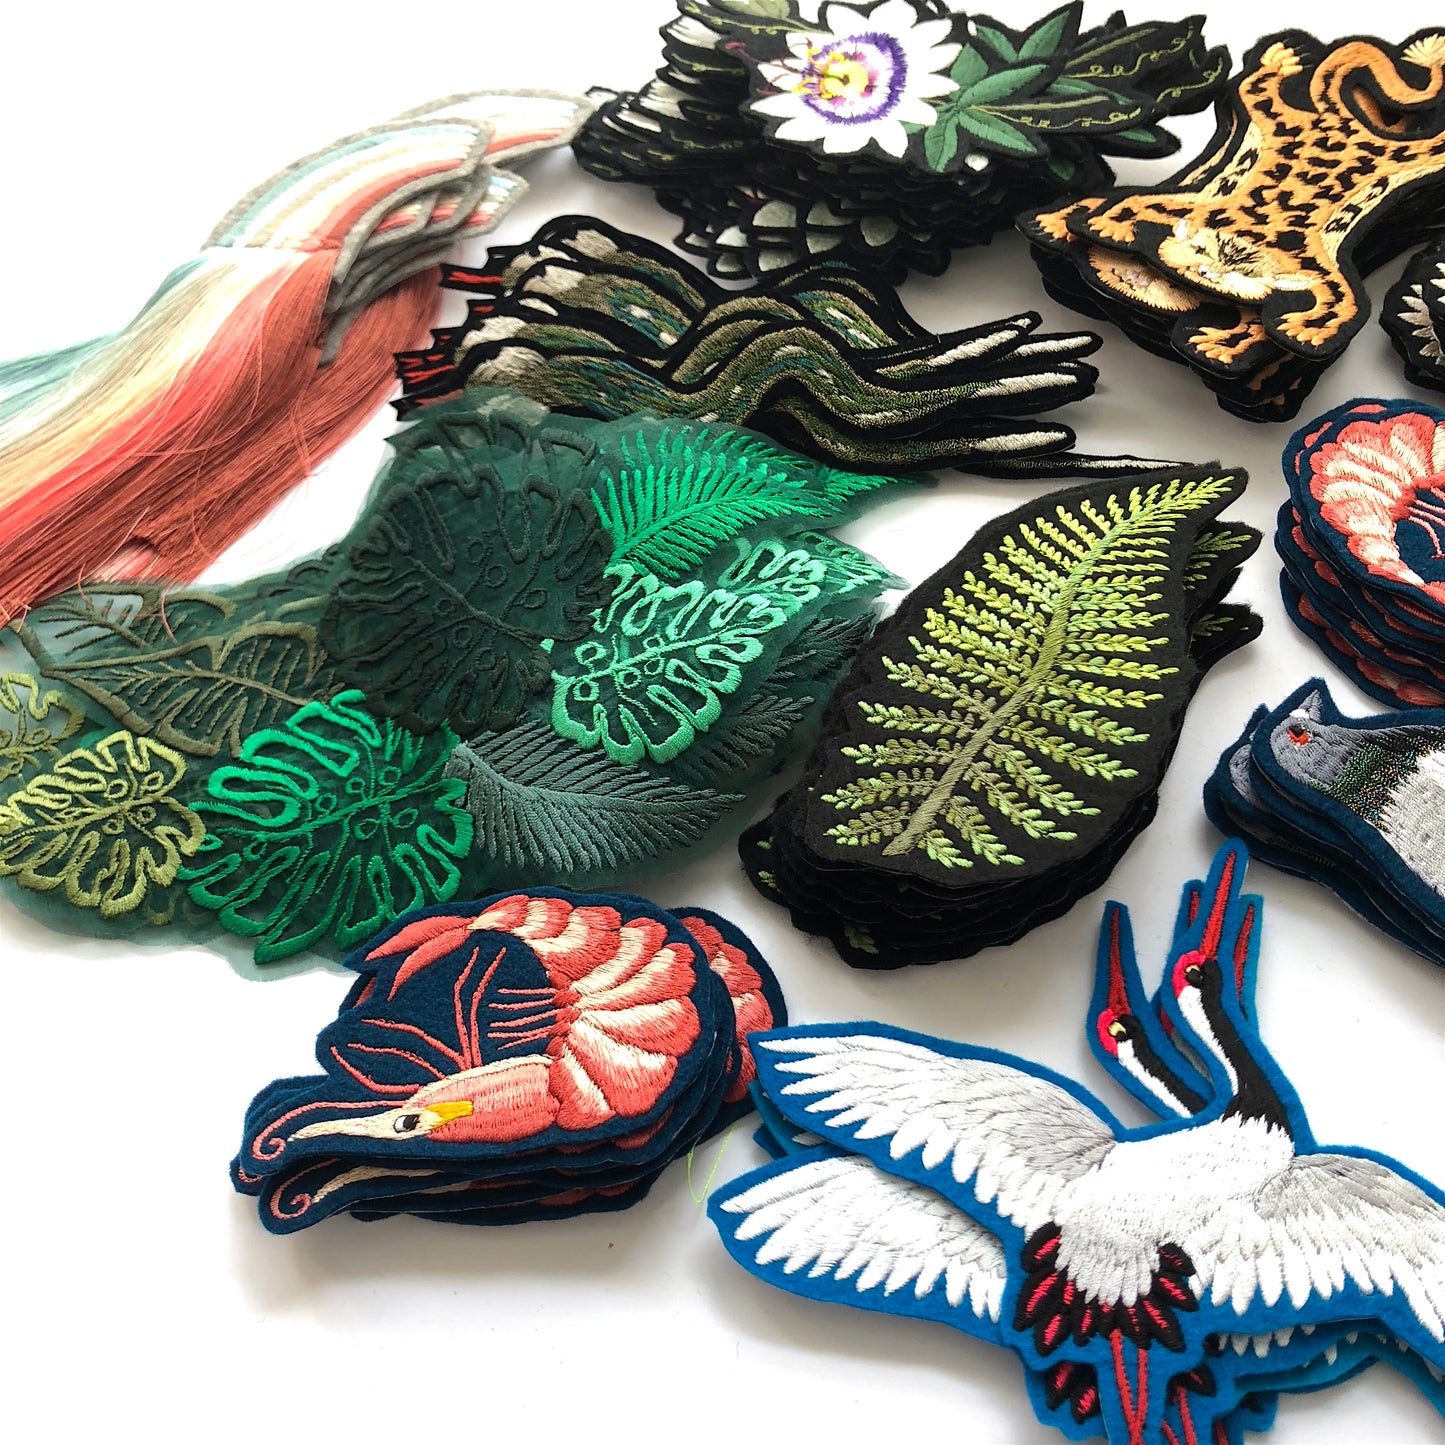 Selection of Ellie Mac embroidered patches and artworks including fern, prawn and sheer silk embroidered leaves